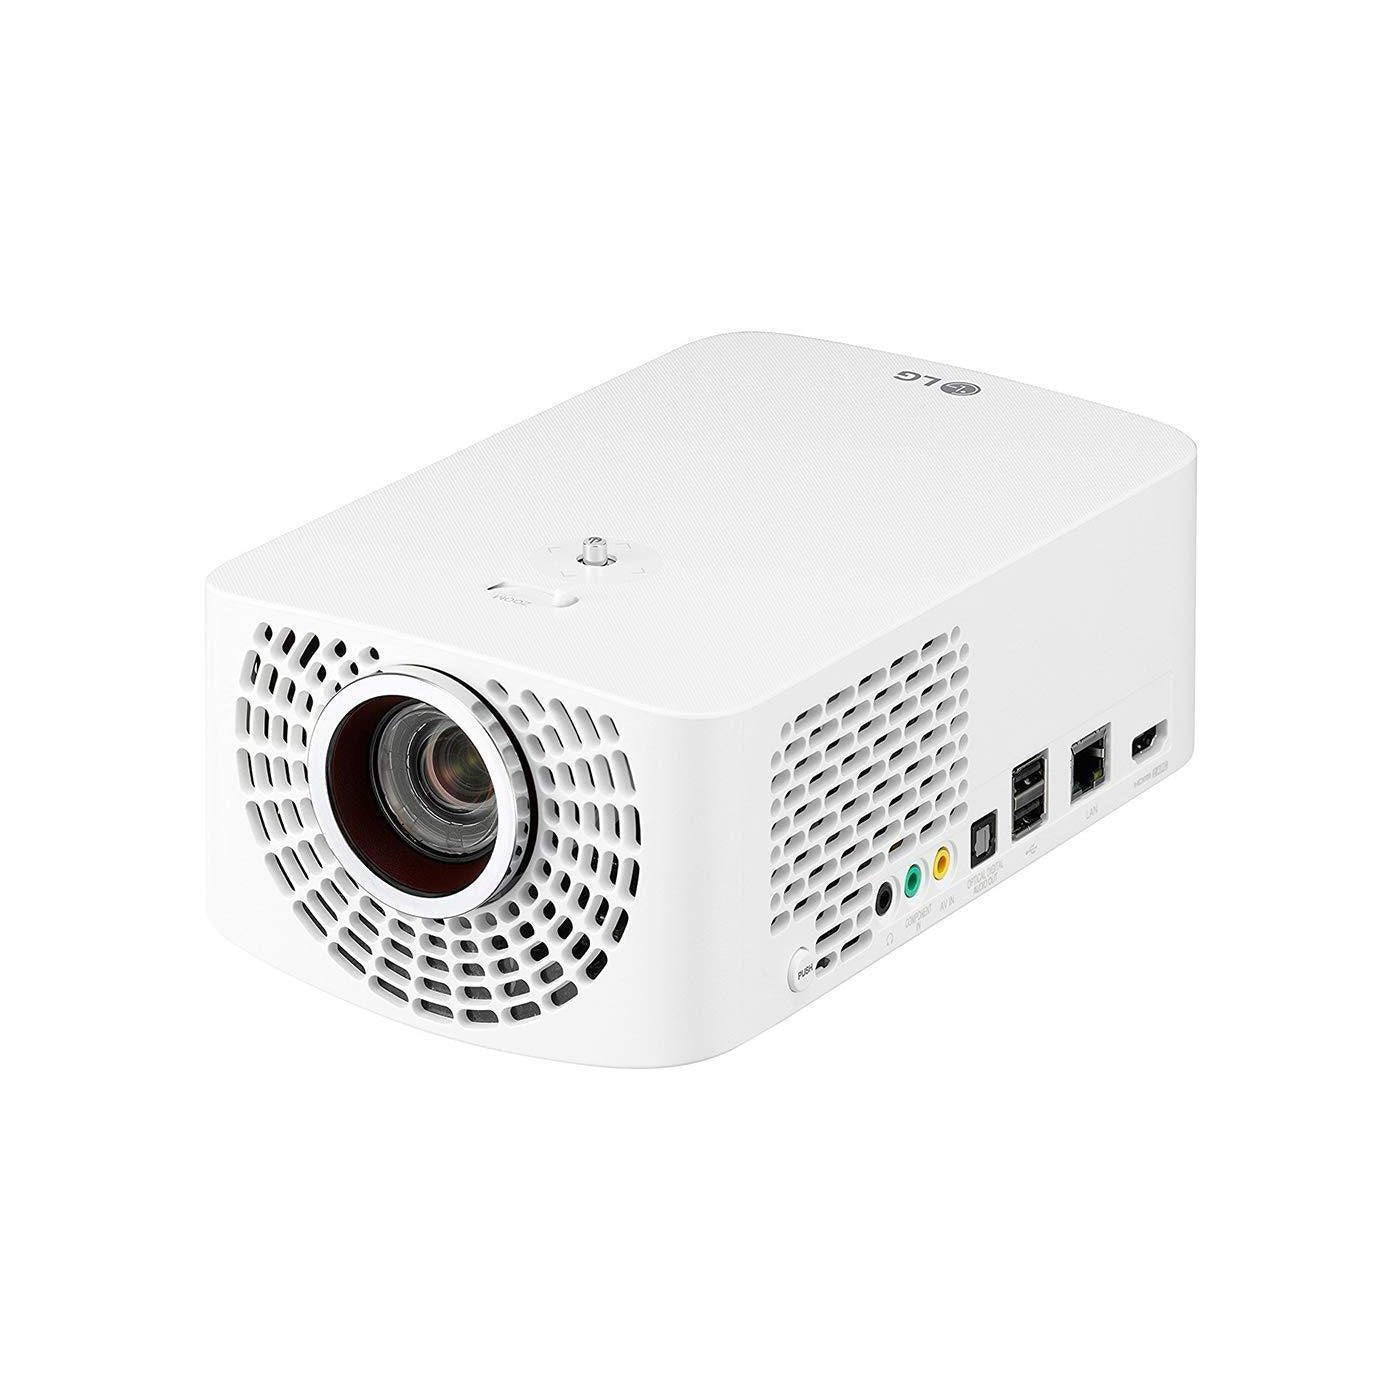 LG PF1500W LED Home Theater Projector with Smart TV and Magic Remote